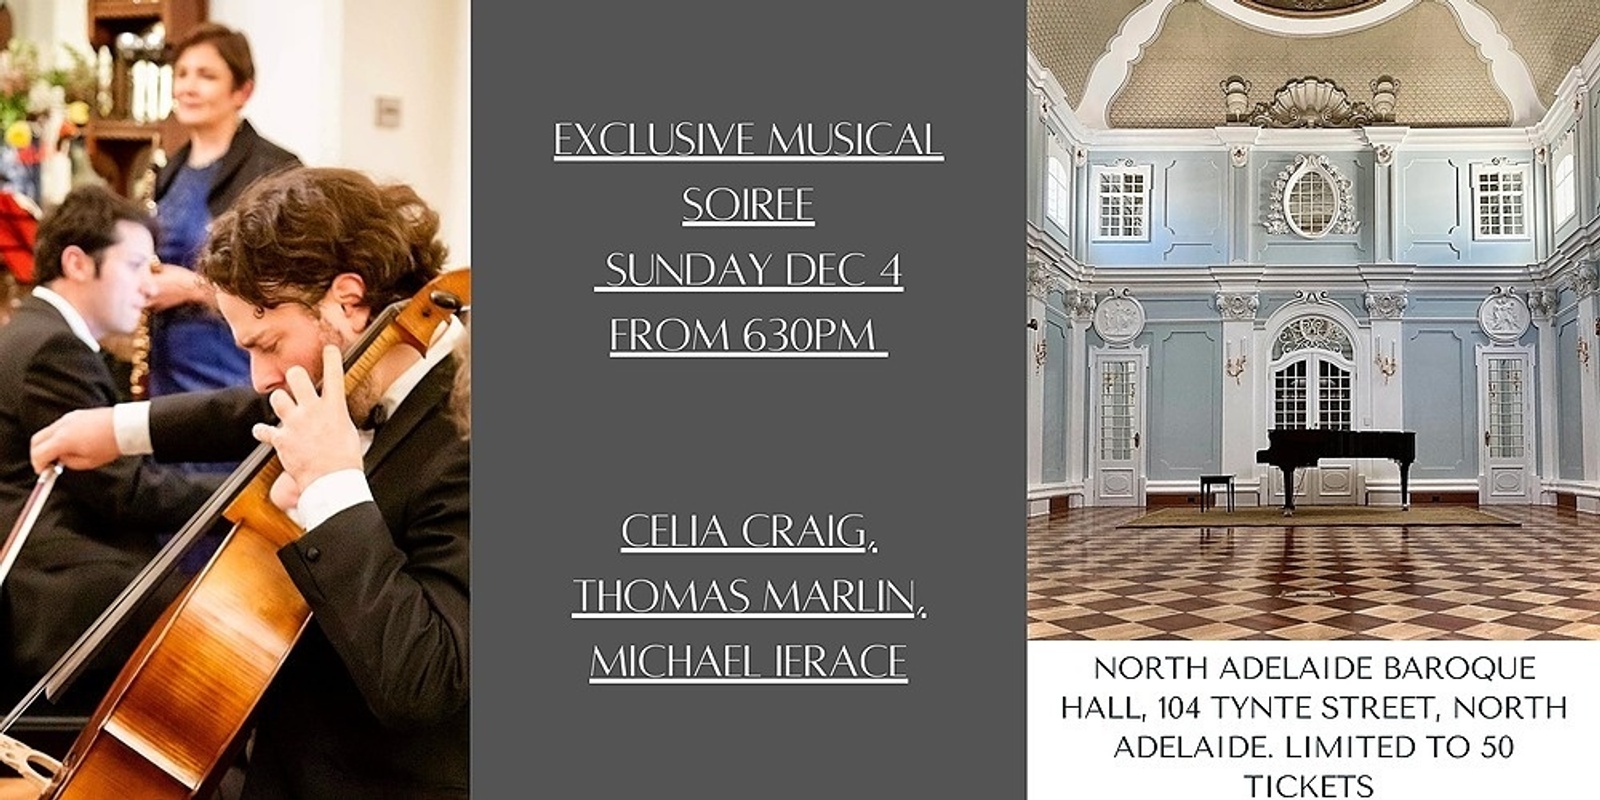 Banner image for Exclusive Musical Soiree at North Adelaide Baroque Hall, Tynte Street